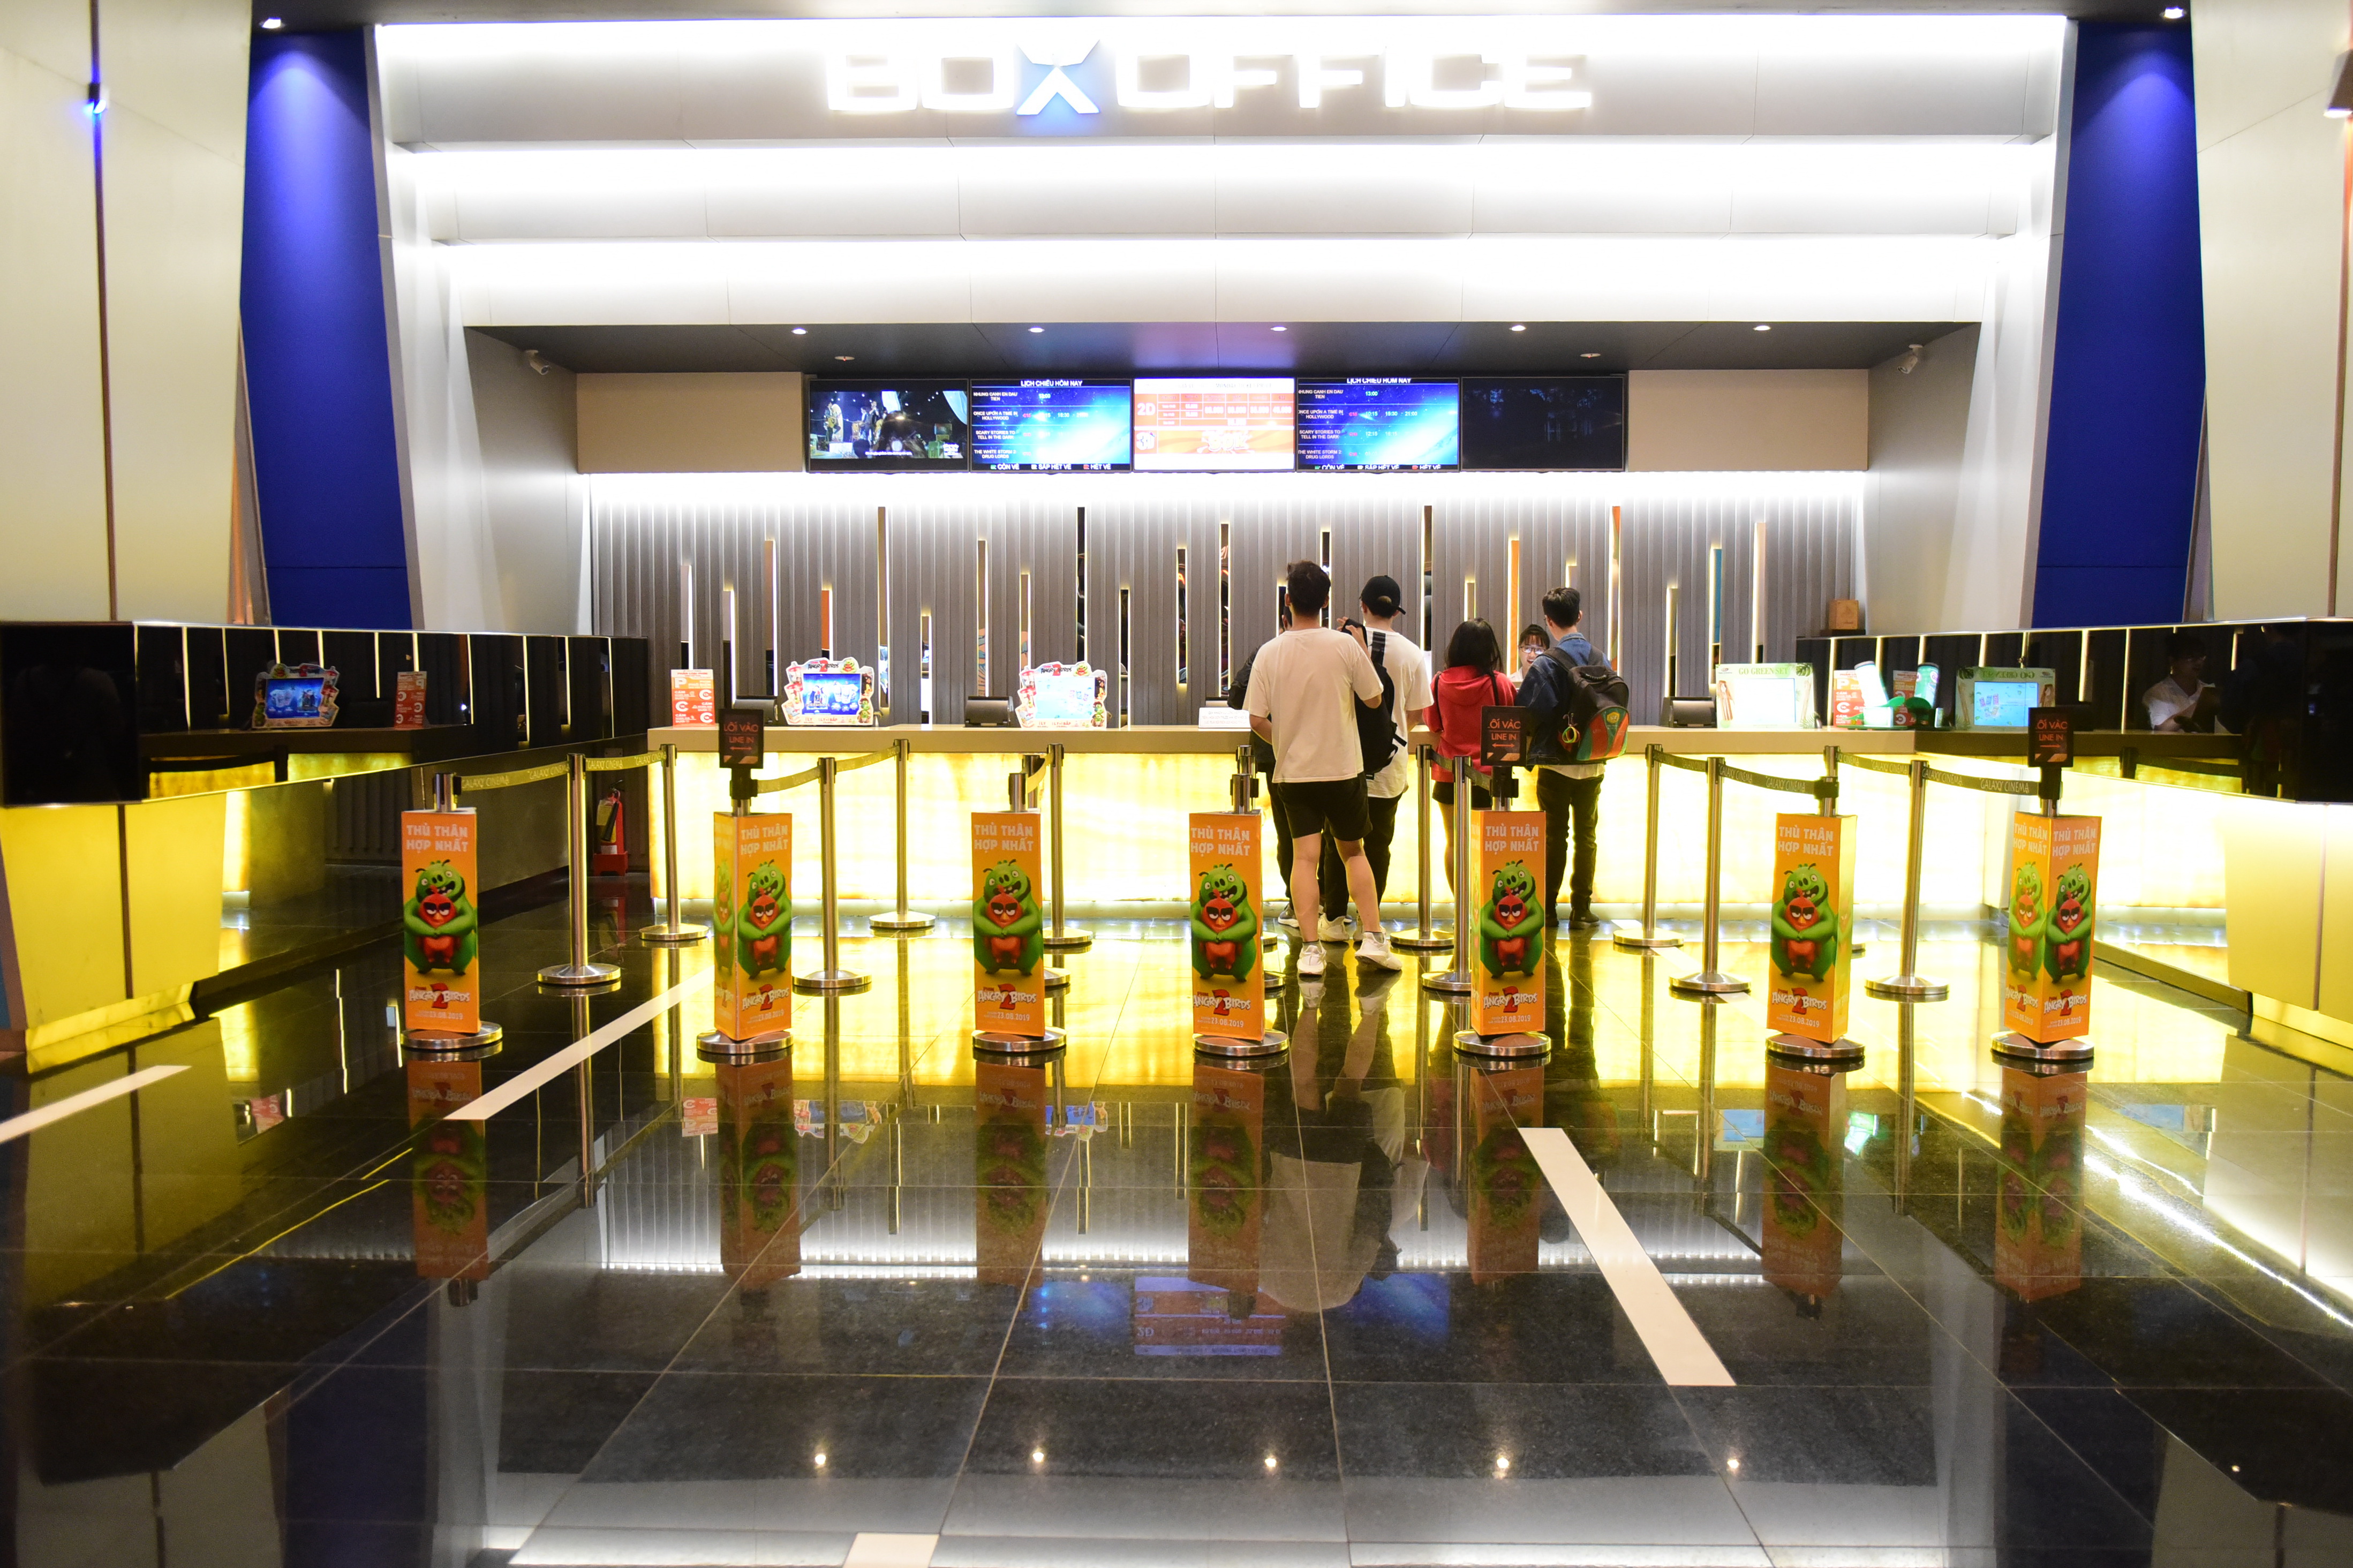 Movie-goers are buying ticket for their movies at a cinema in District 1 in the evening of August 19, 2019. Photo: Quang Dinh/Tuoi Tre